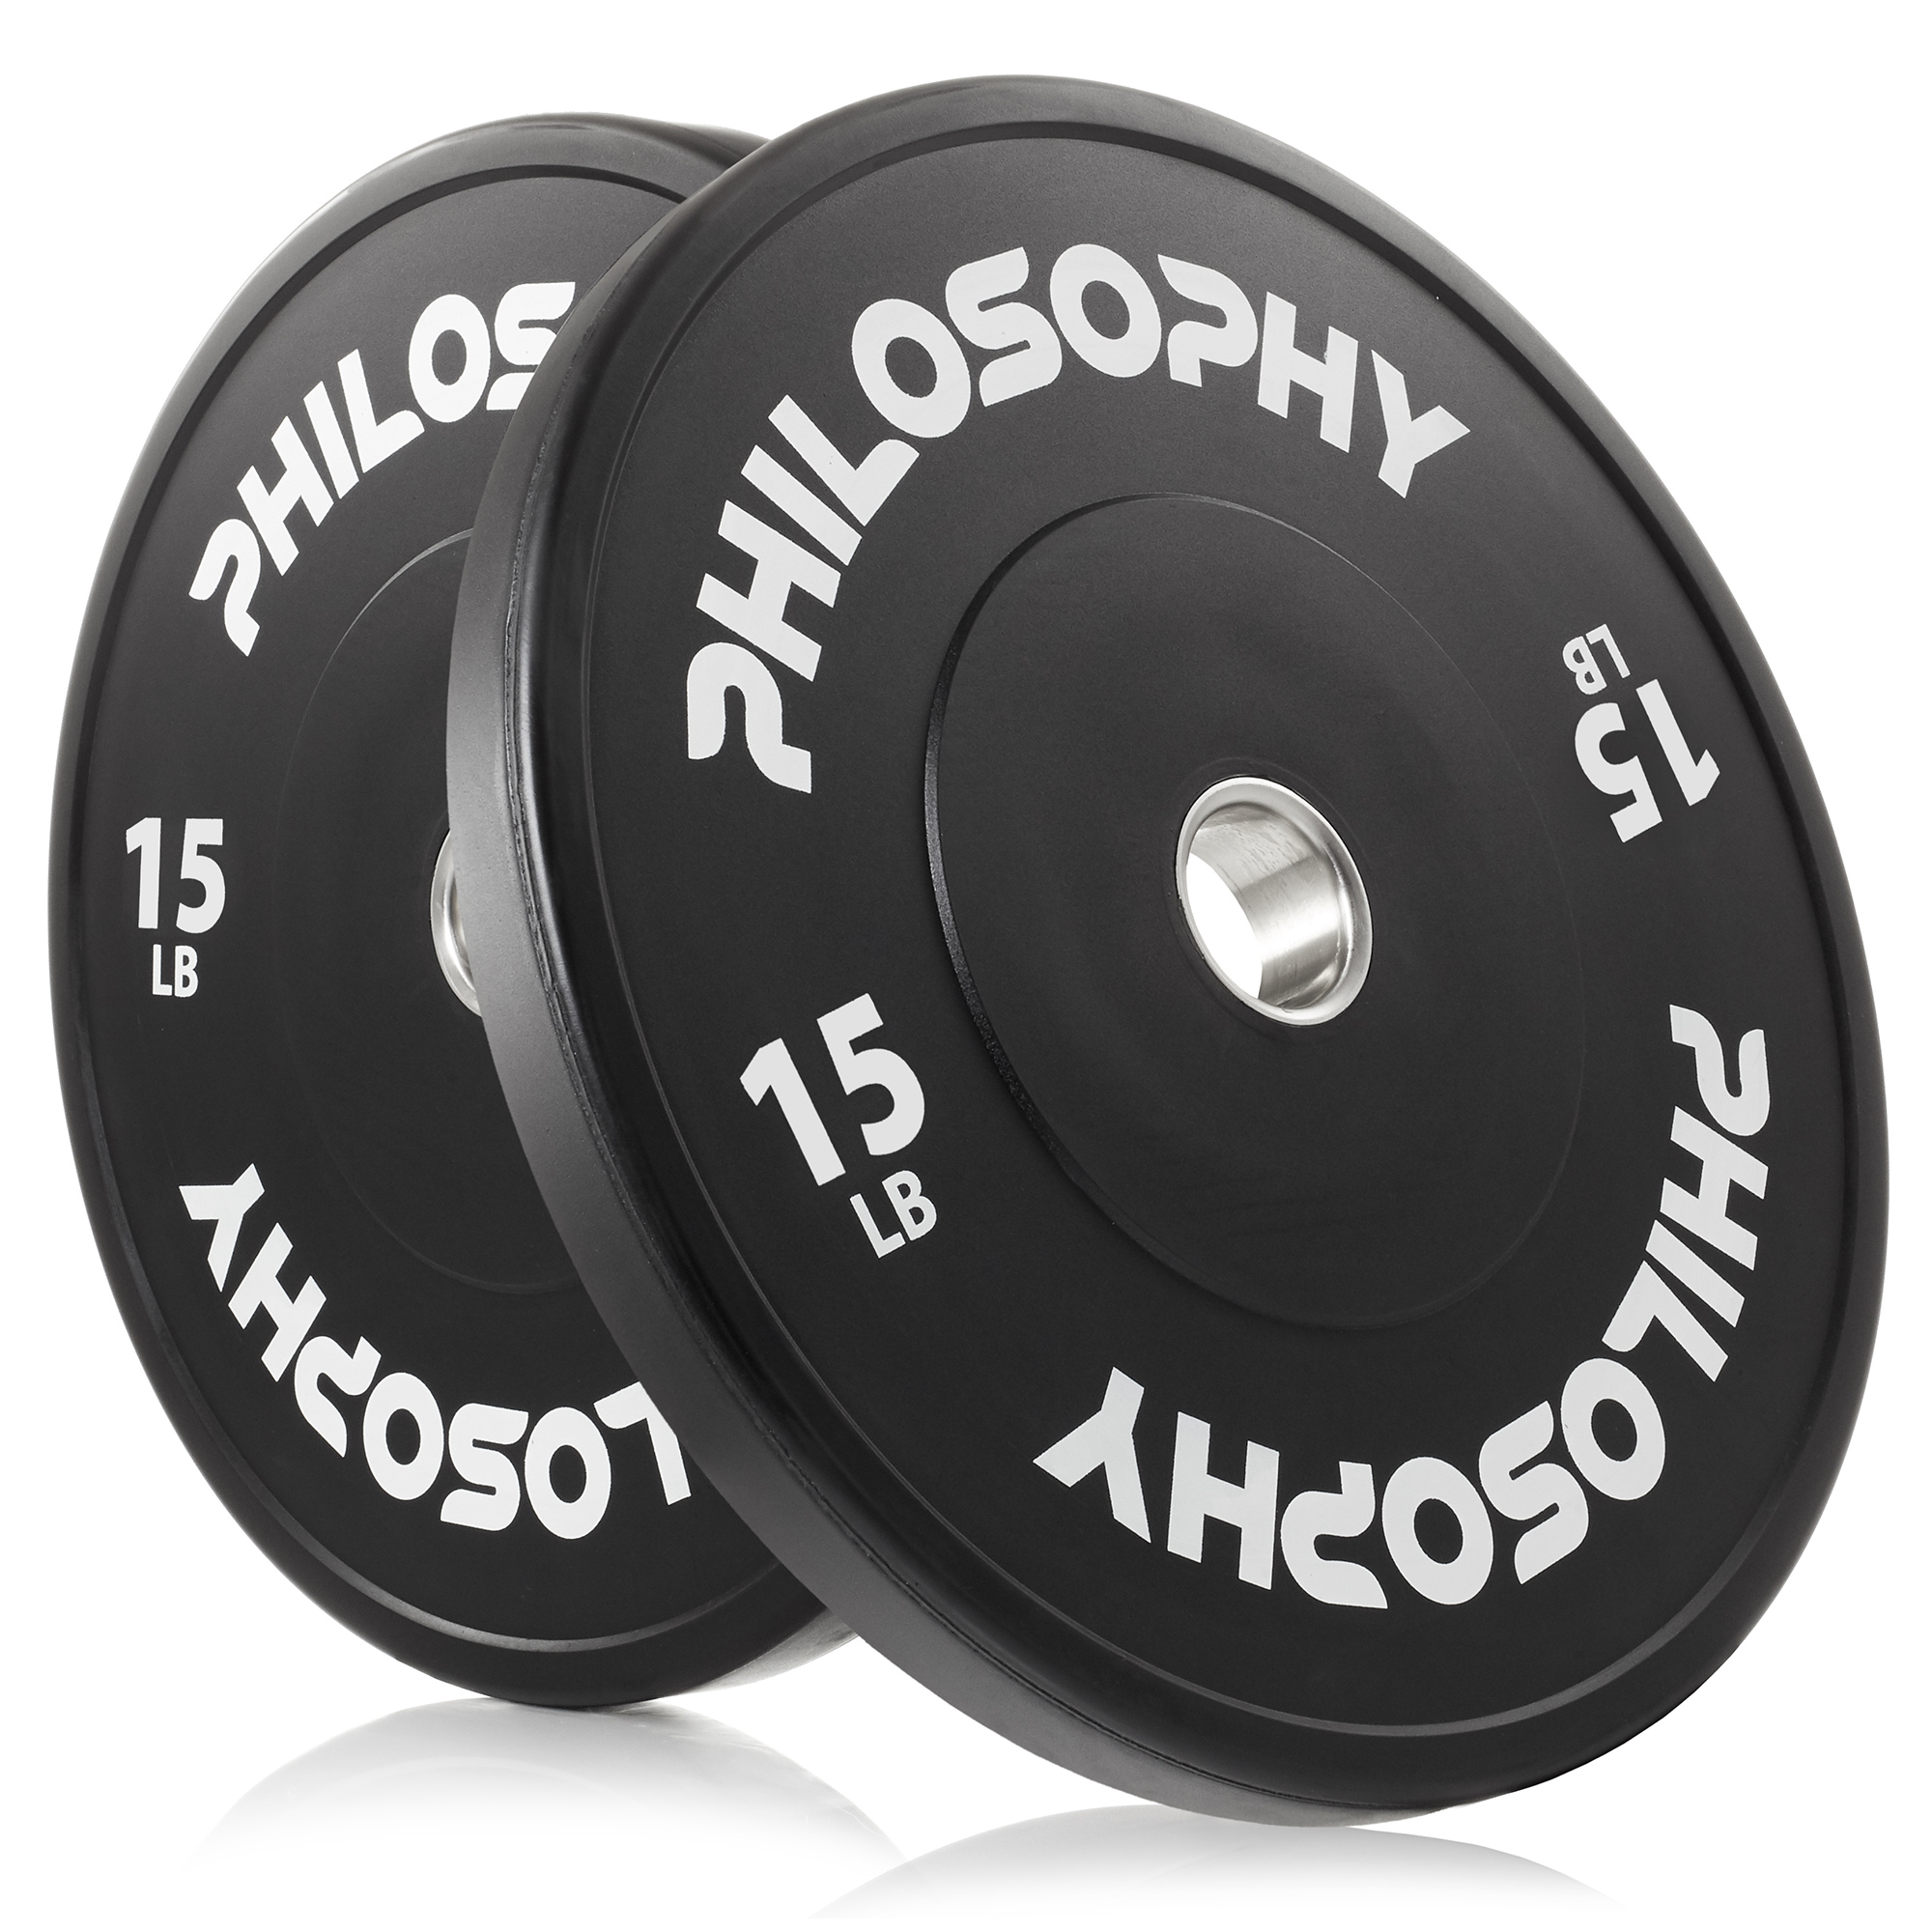 Philosophy Gym Set of 2 Olympic 2-Inch Rubber Bumper Plates (15 LB each) Black